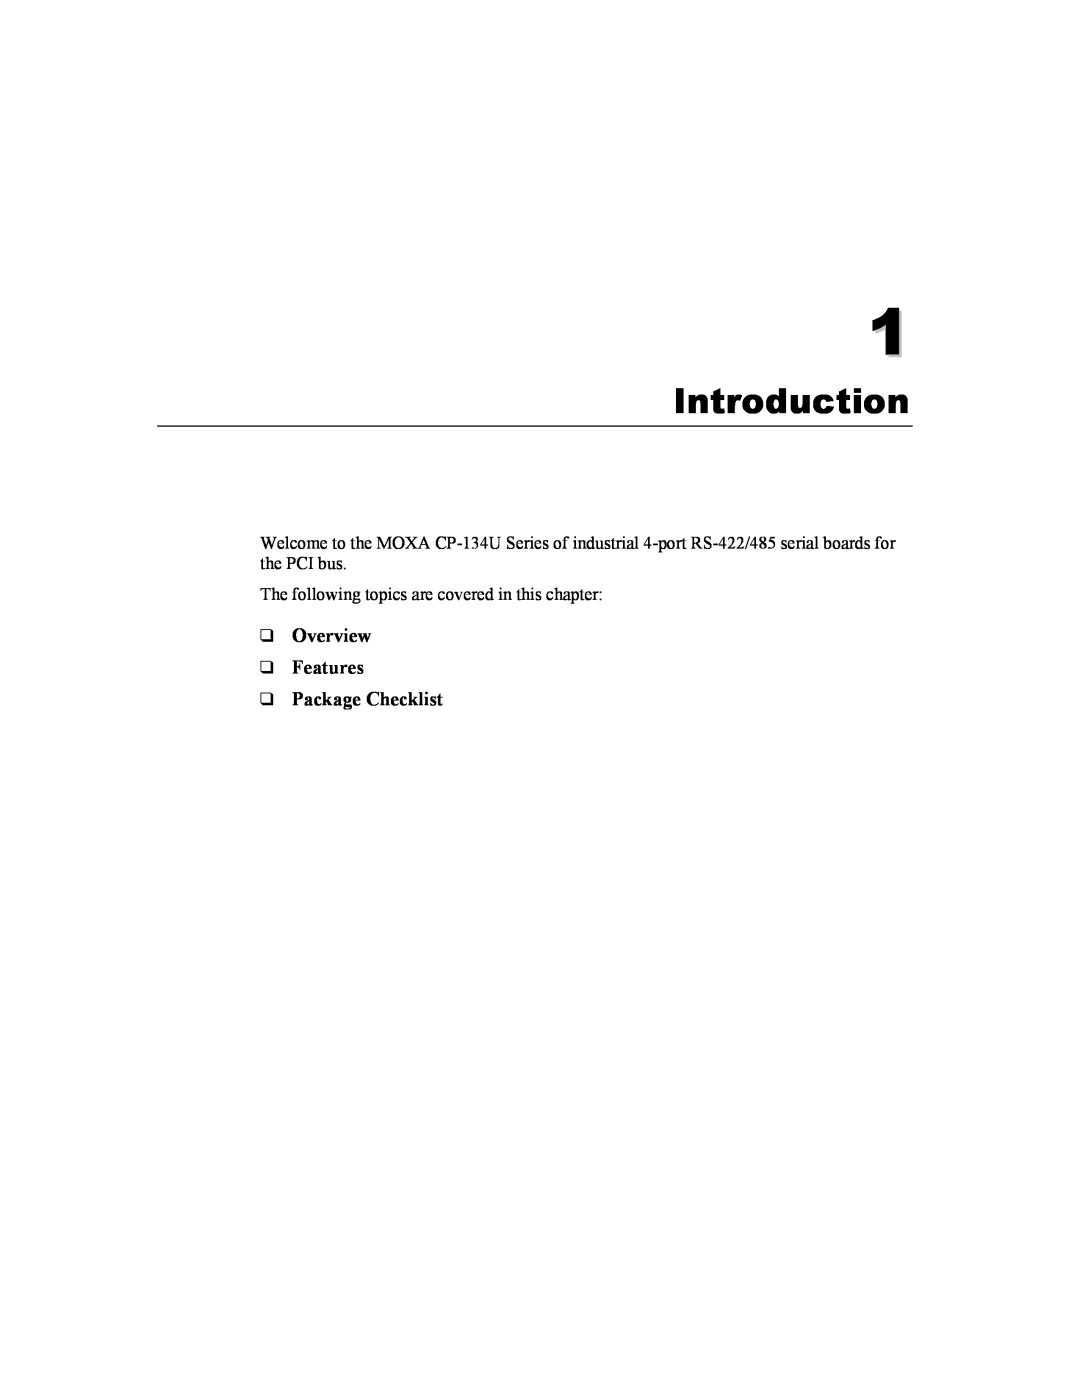 Moxa Technologies CP-134U user manual Introduction, Overview Features Package Checklist 